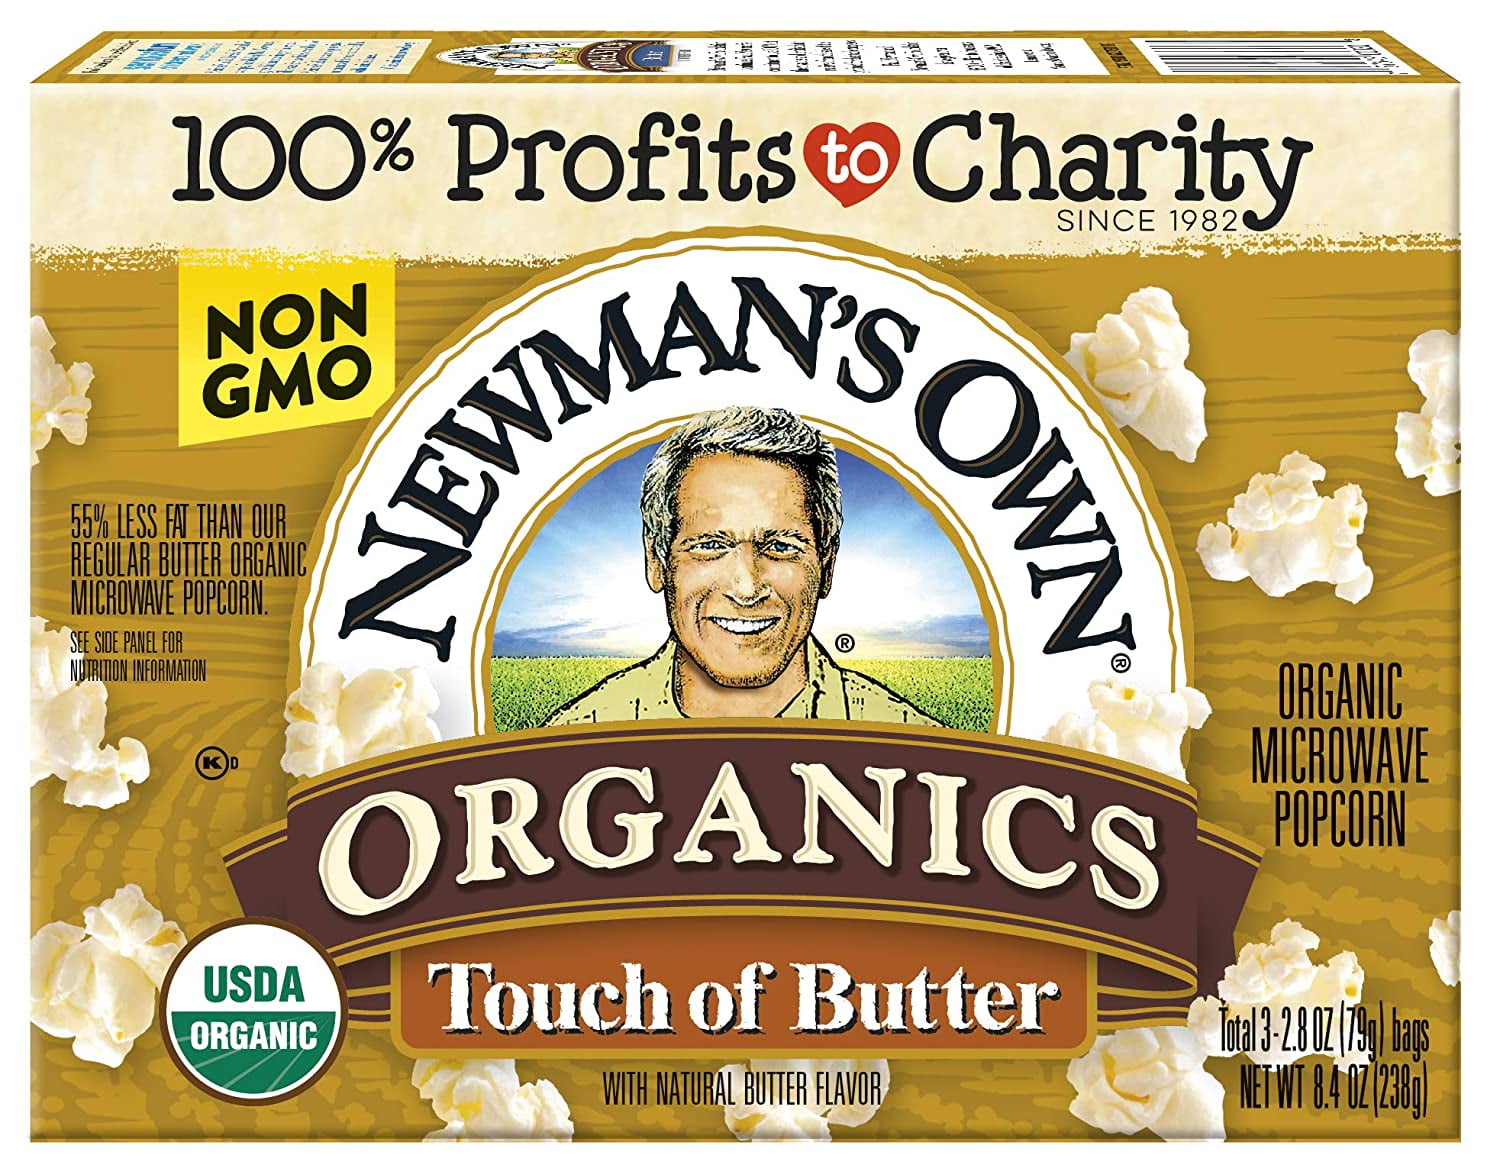 Newmans Own Organics Microwave Popcorn, Touch of Butter, 8.4oz (Pack of